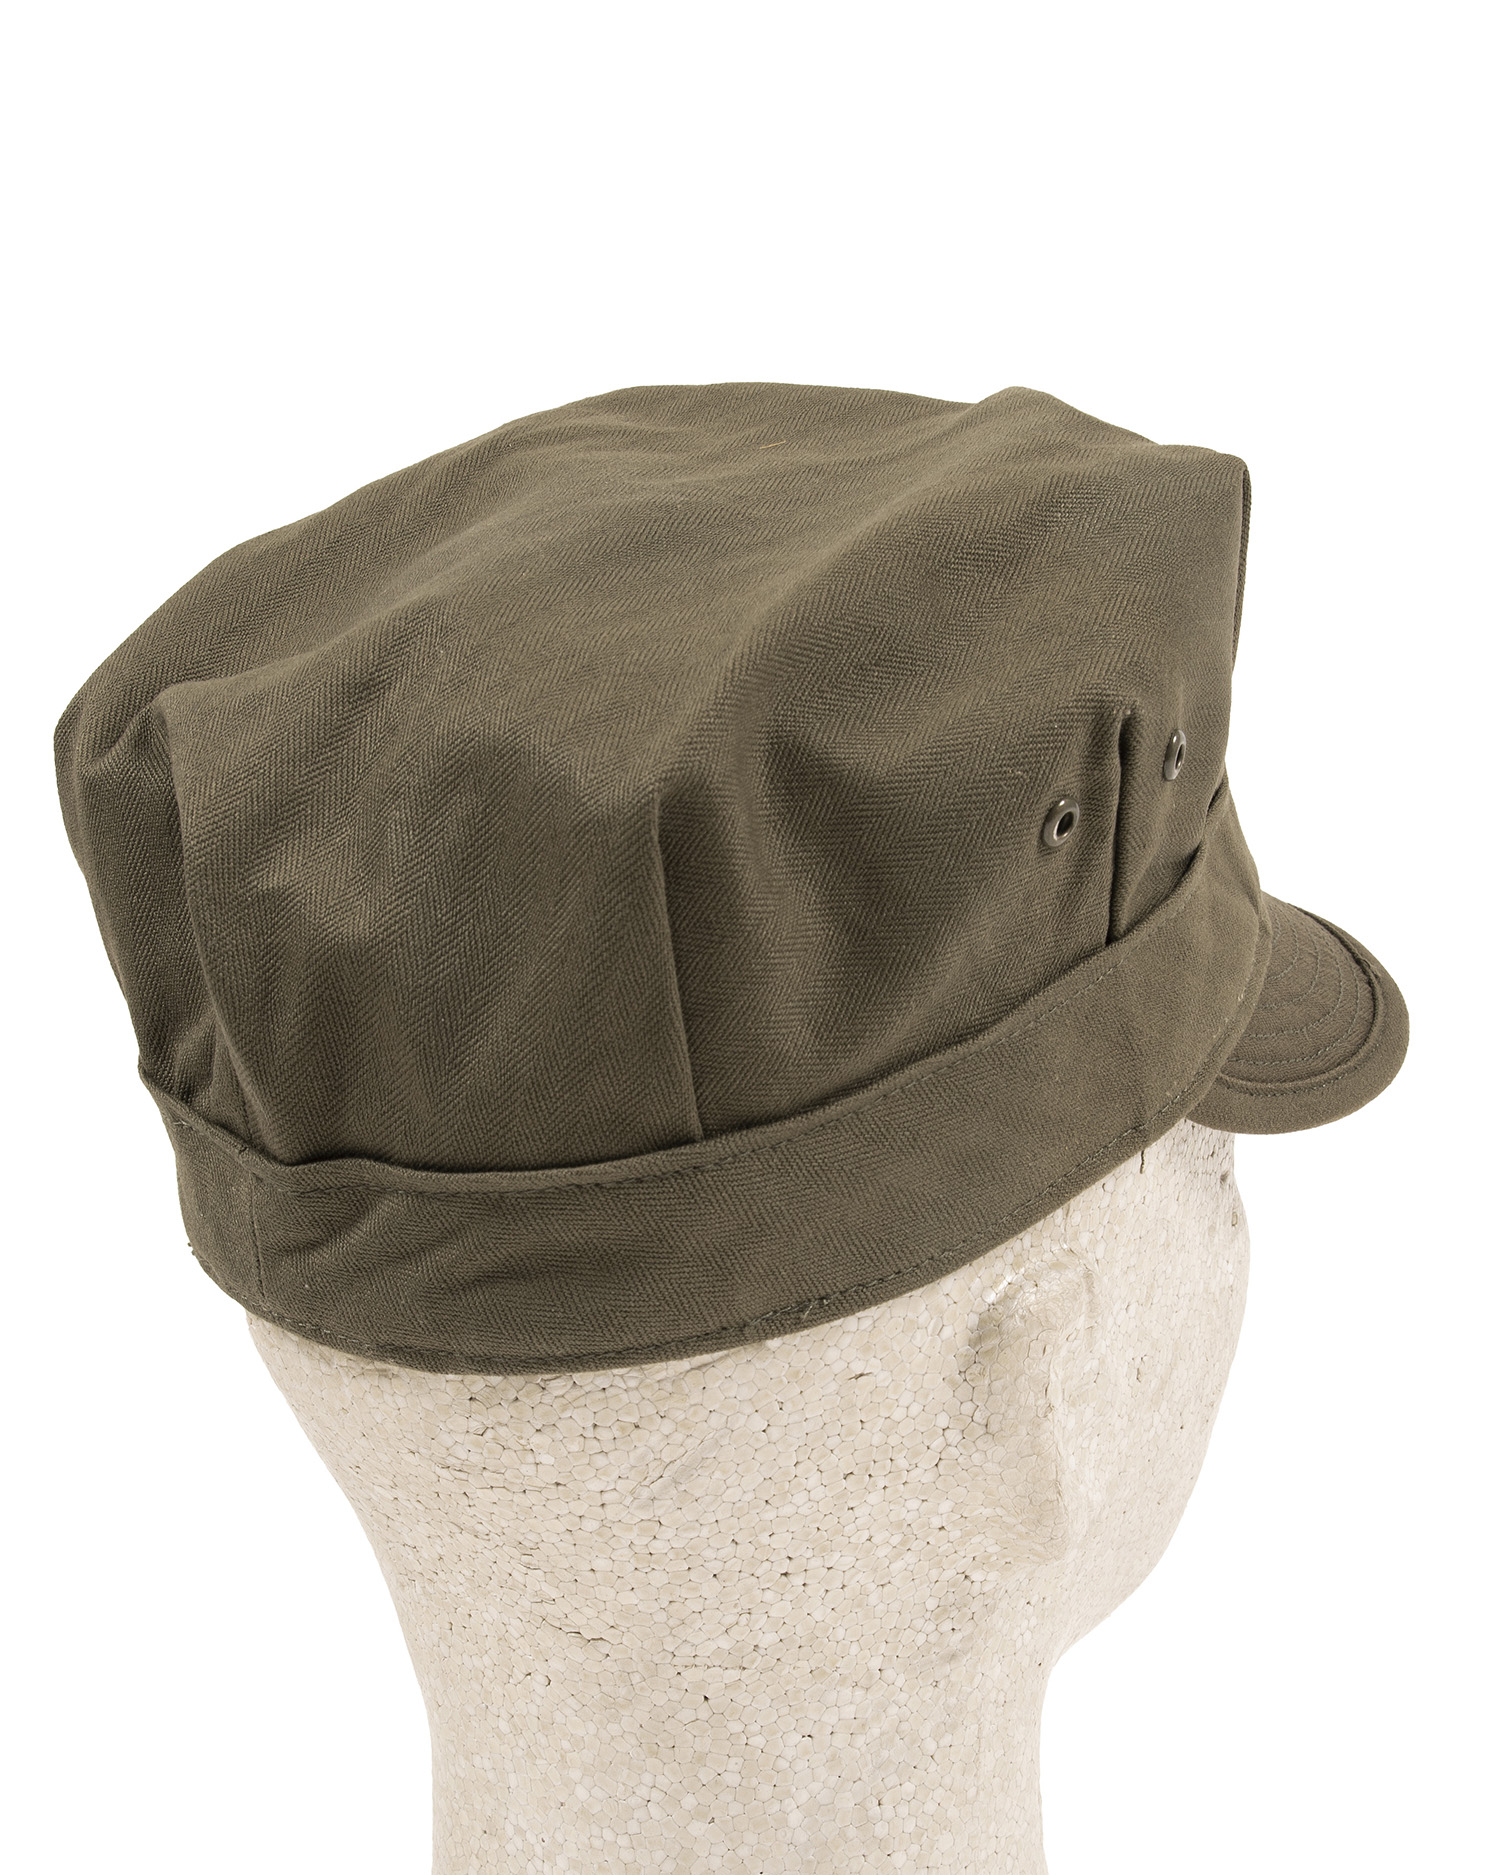 WWII US Army HBT Cap